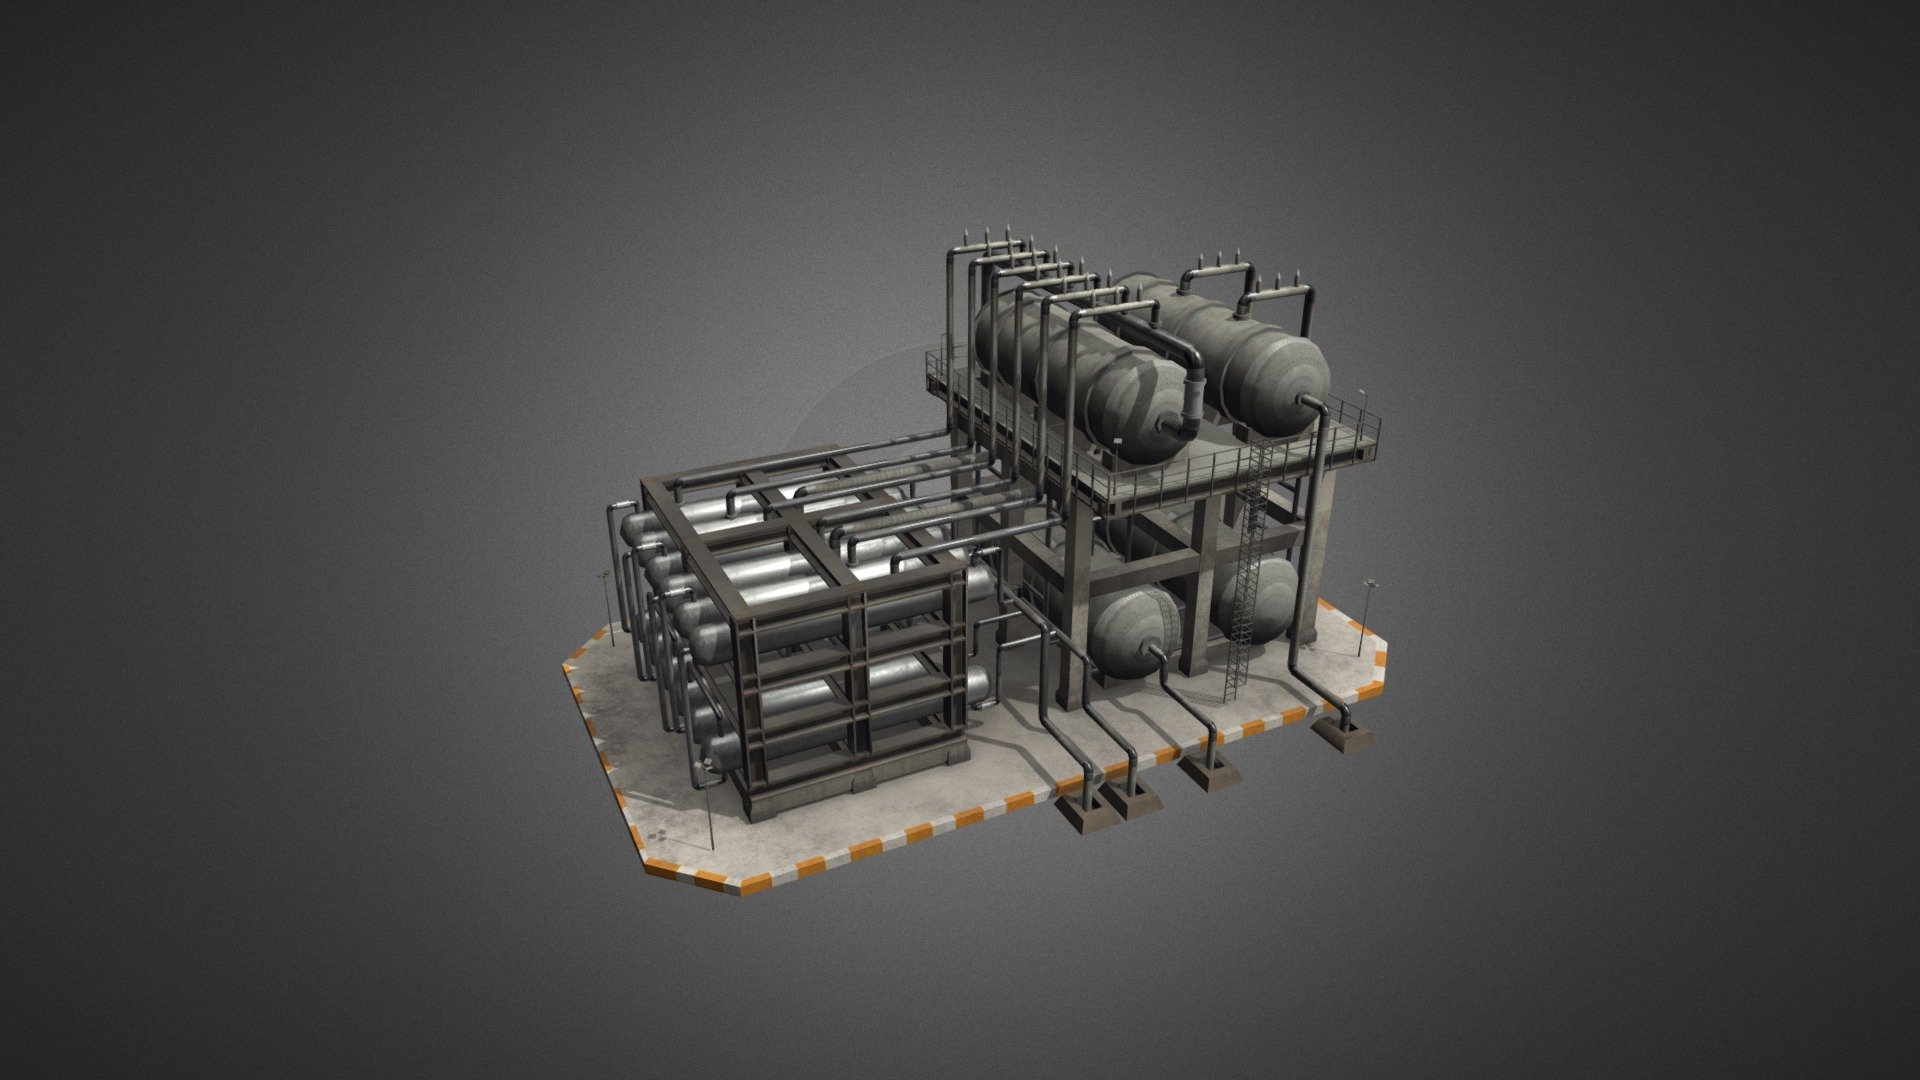 Low poly game-ready 3d model of an Oil Refinery 11 for Virtual Reality (VR), Augmented Reality (AR), games and other real-time apps 3d model